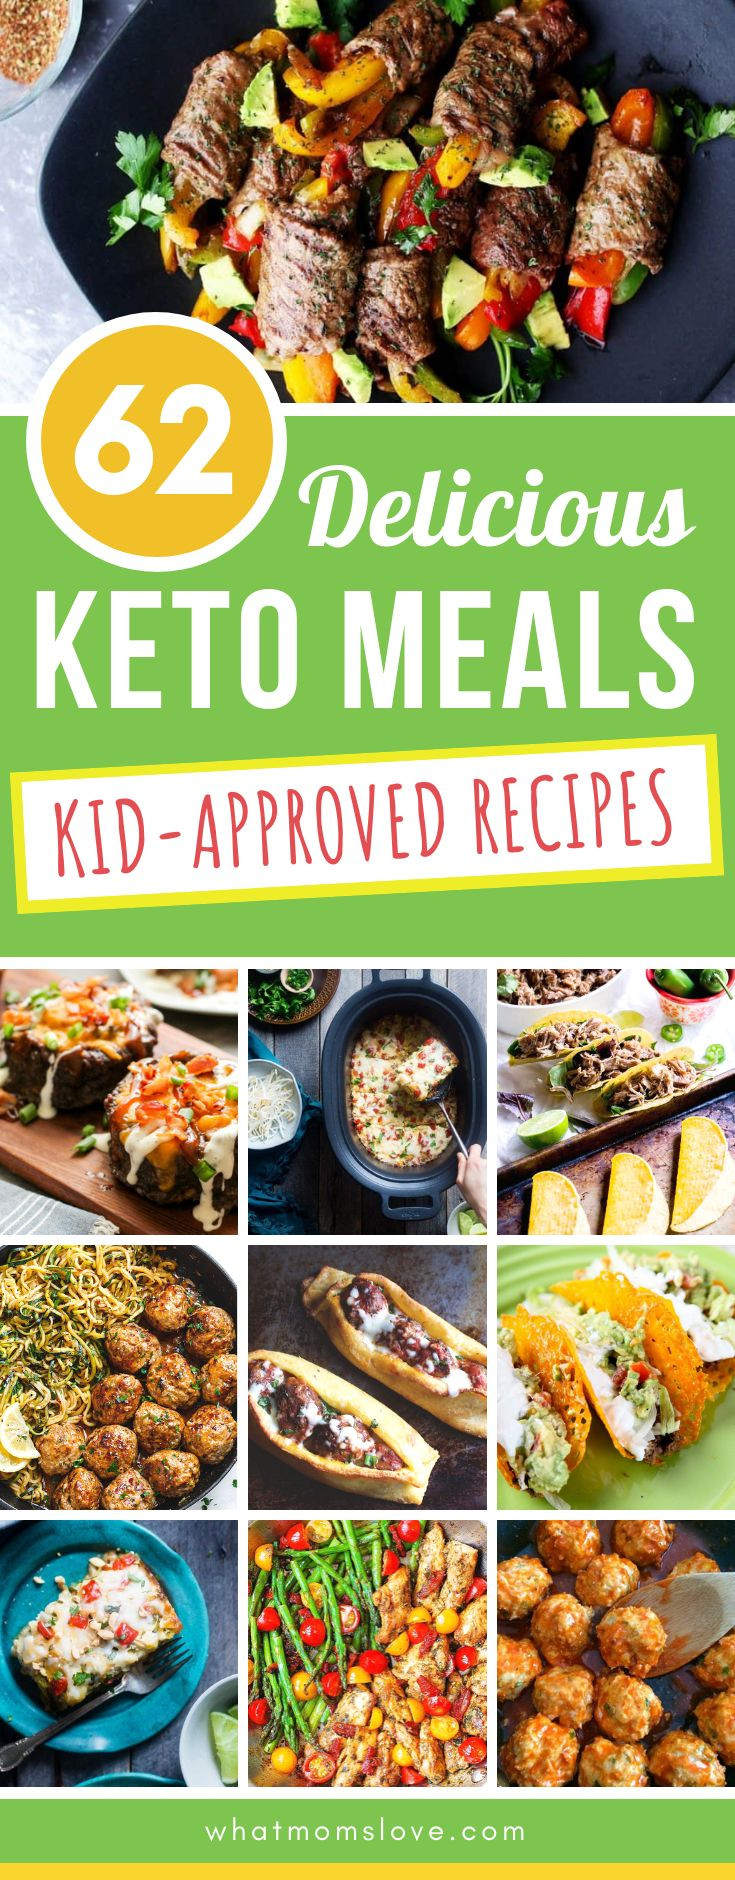 Kid Friendly Dinners For Picky Eaters
 60 Kid Friendly Keto Dinner Recipes Your Entire Family